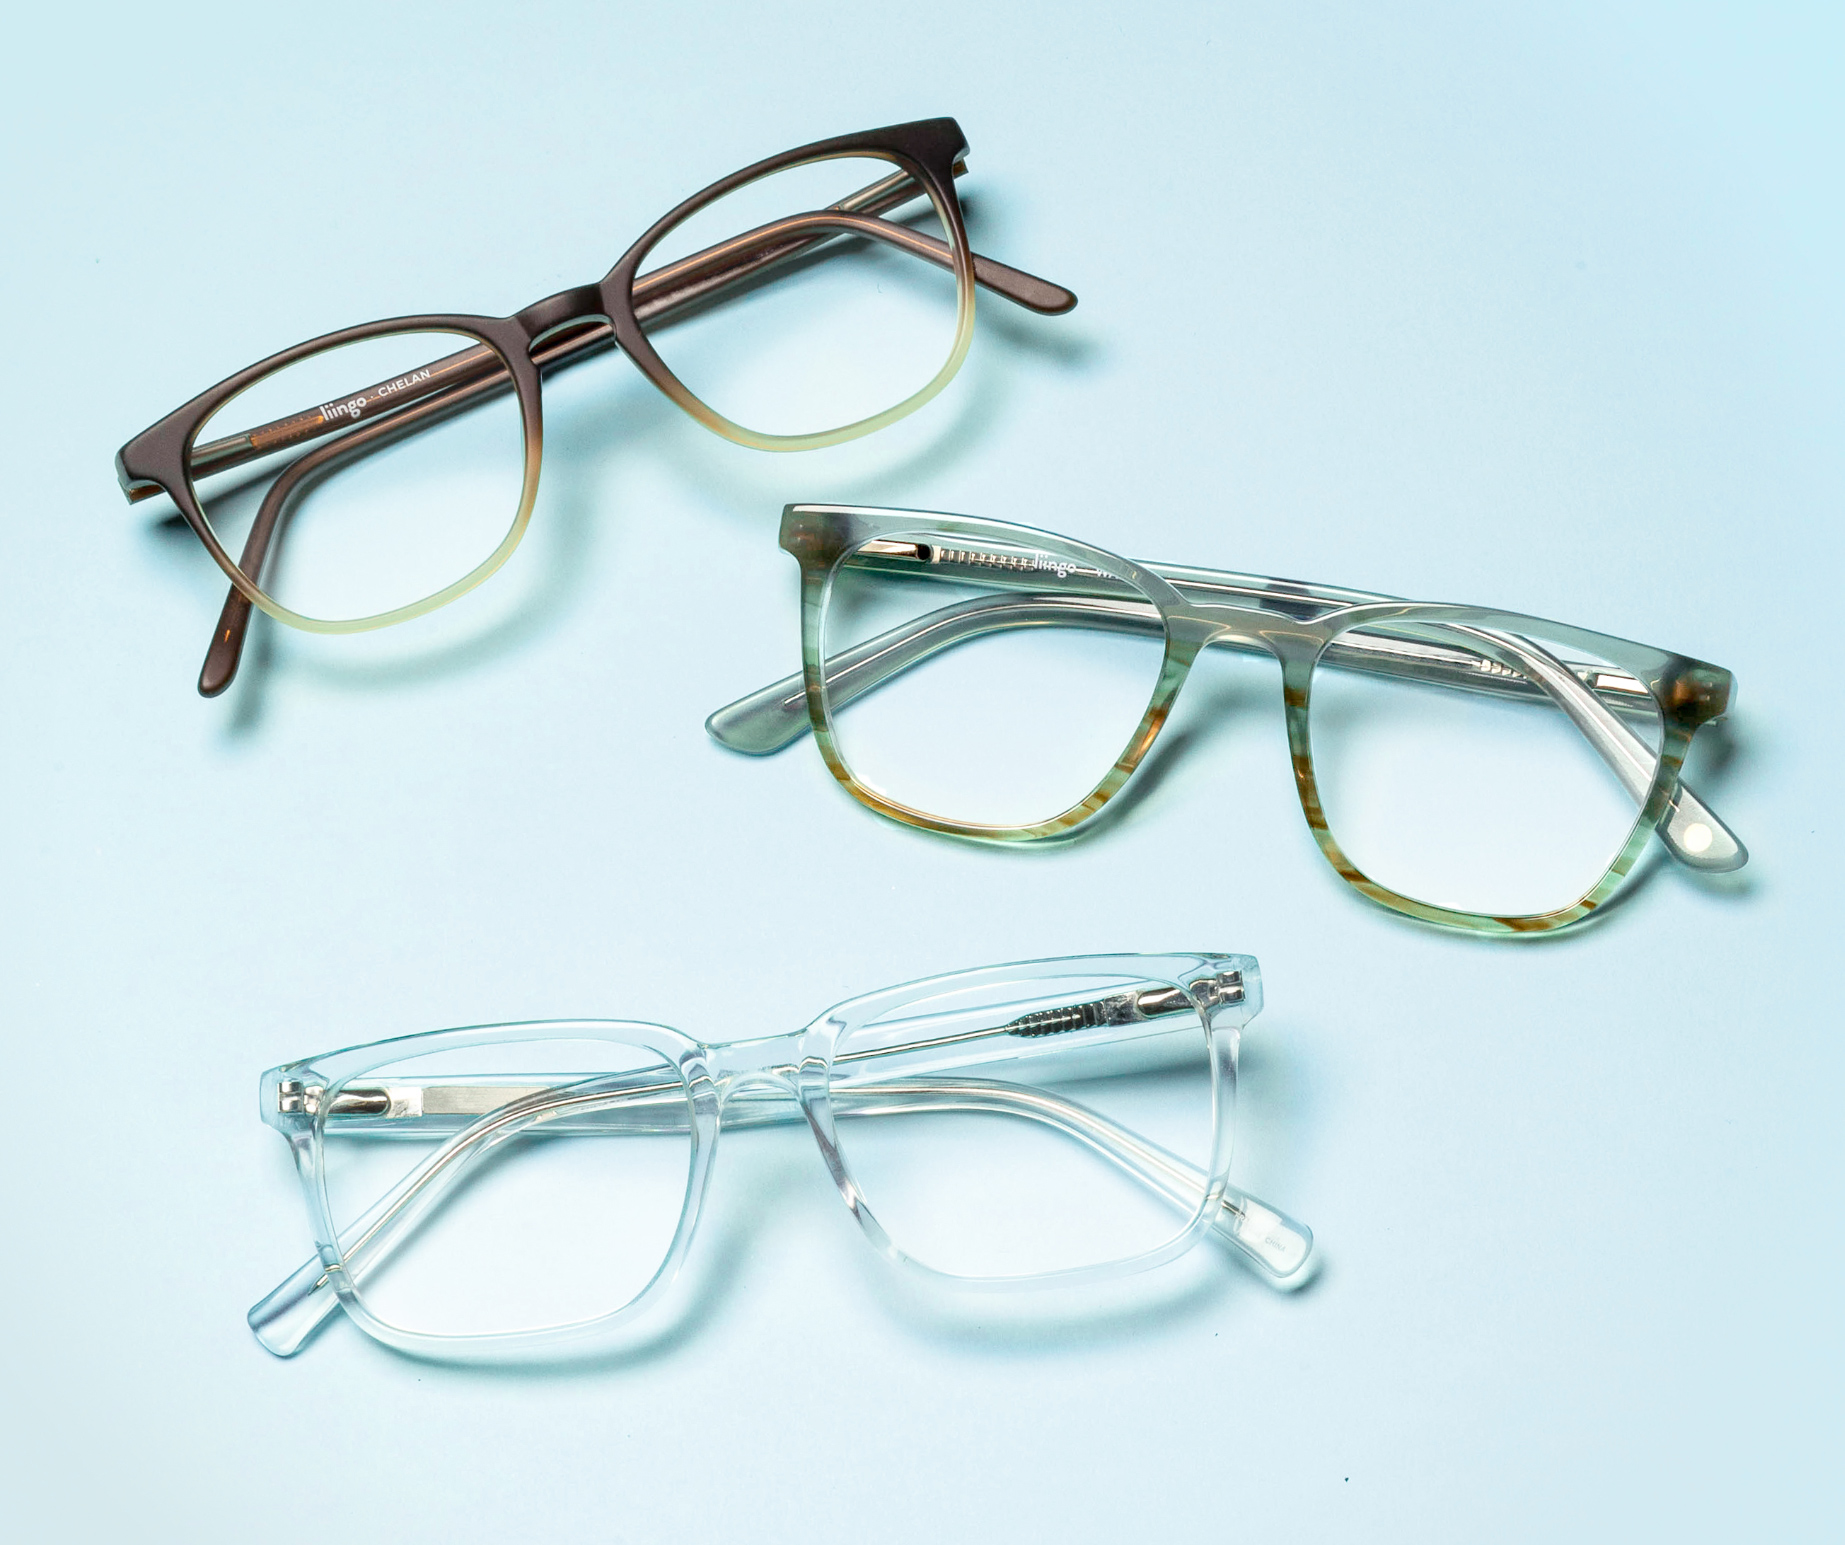 Liingo Eyewear | Our Story of Disruption, Affordability and Style